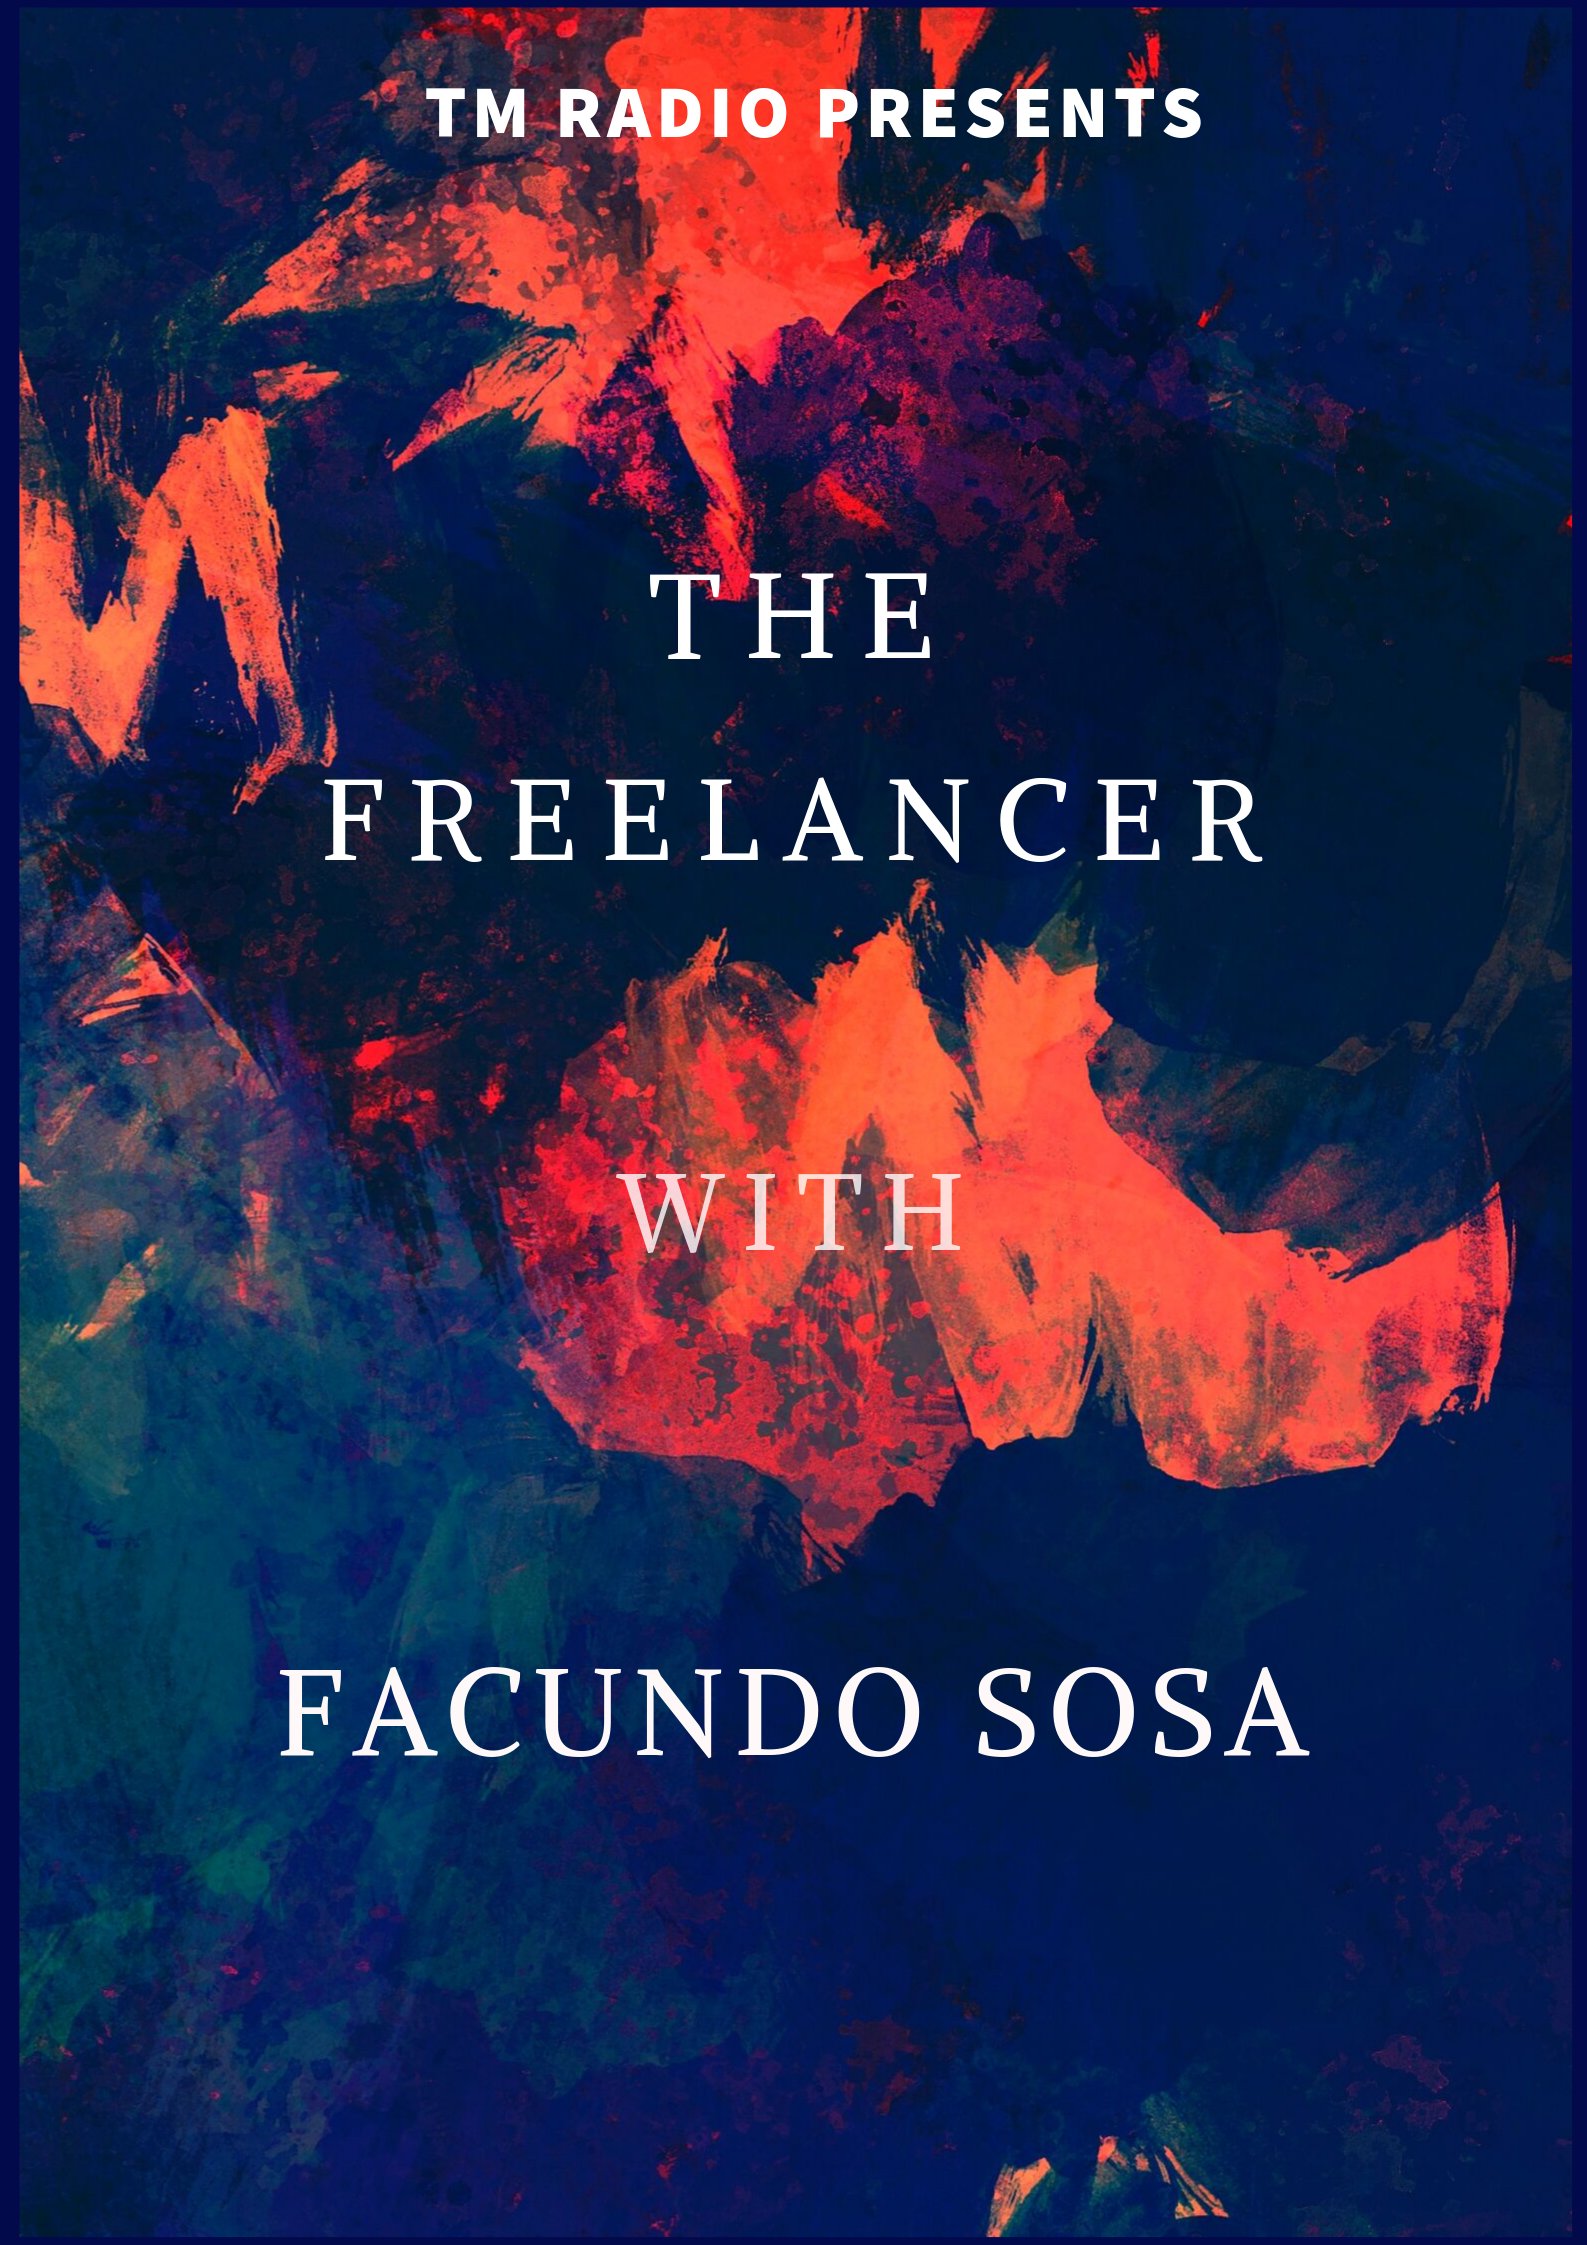 The Freelancer :: Episode 014 (aired on June 27th, 2020) banner logo